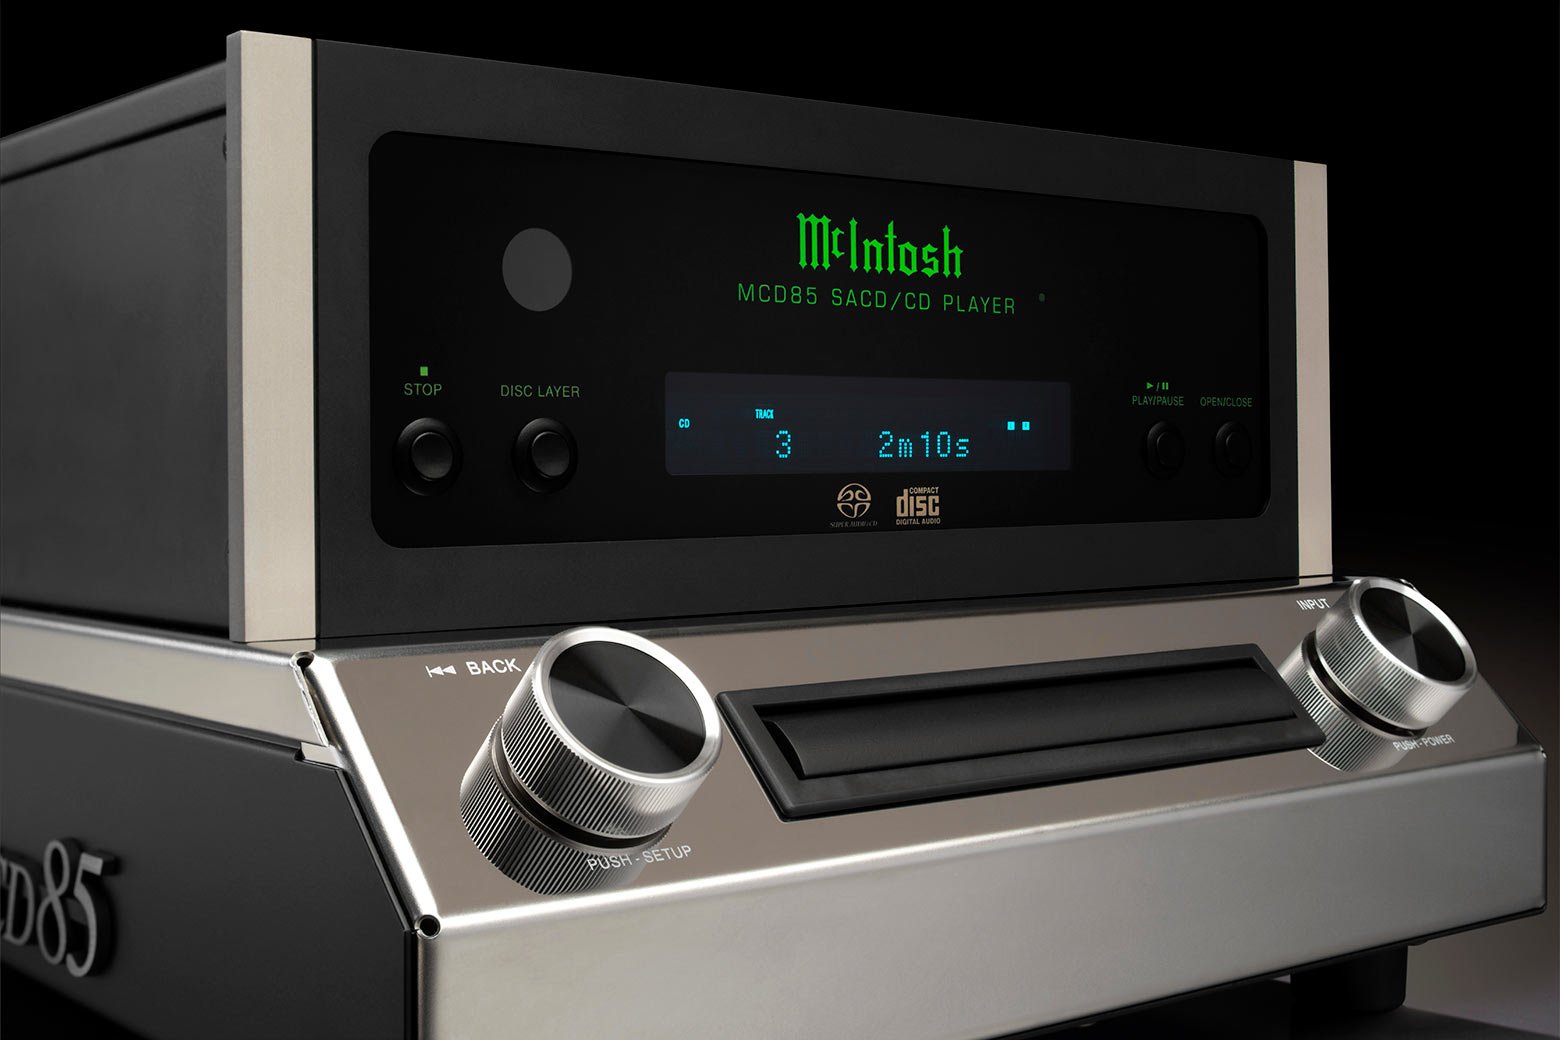 McIntosh MCD85 2-Channel SACD/CD Player (In-Store Purchases Only)